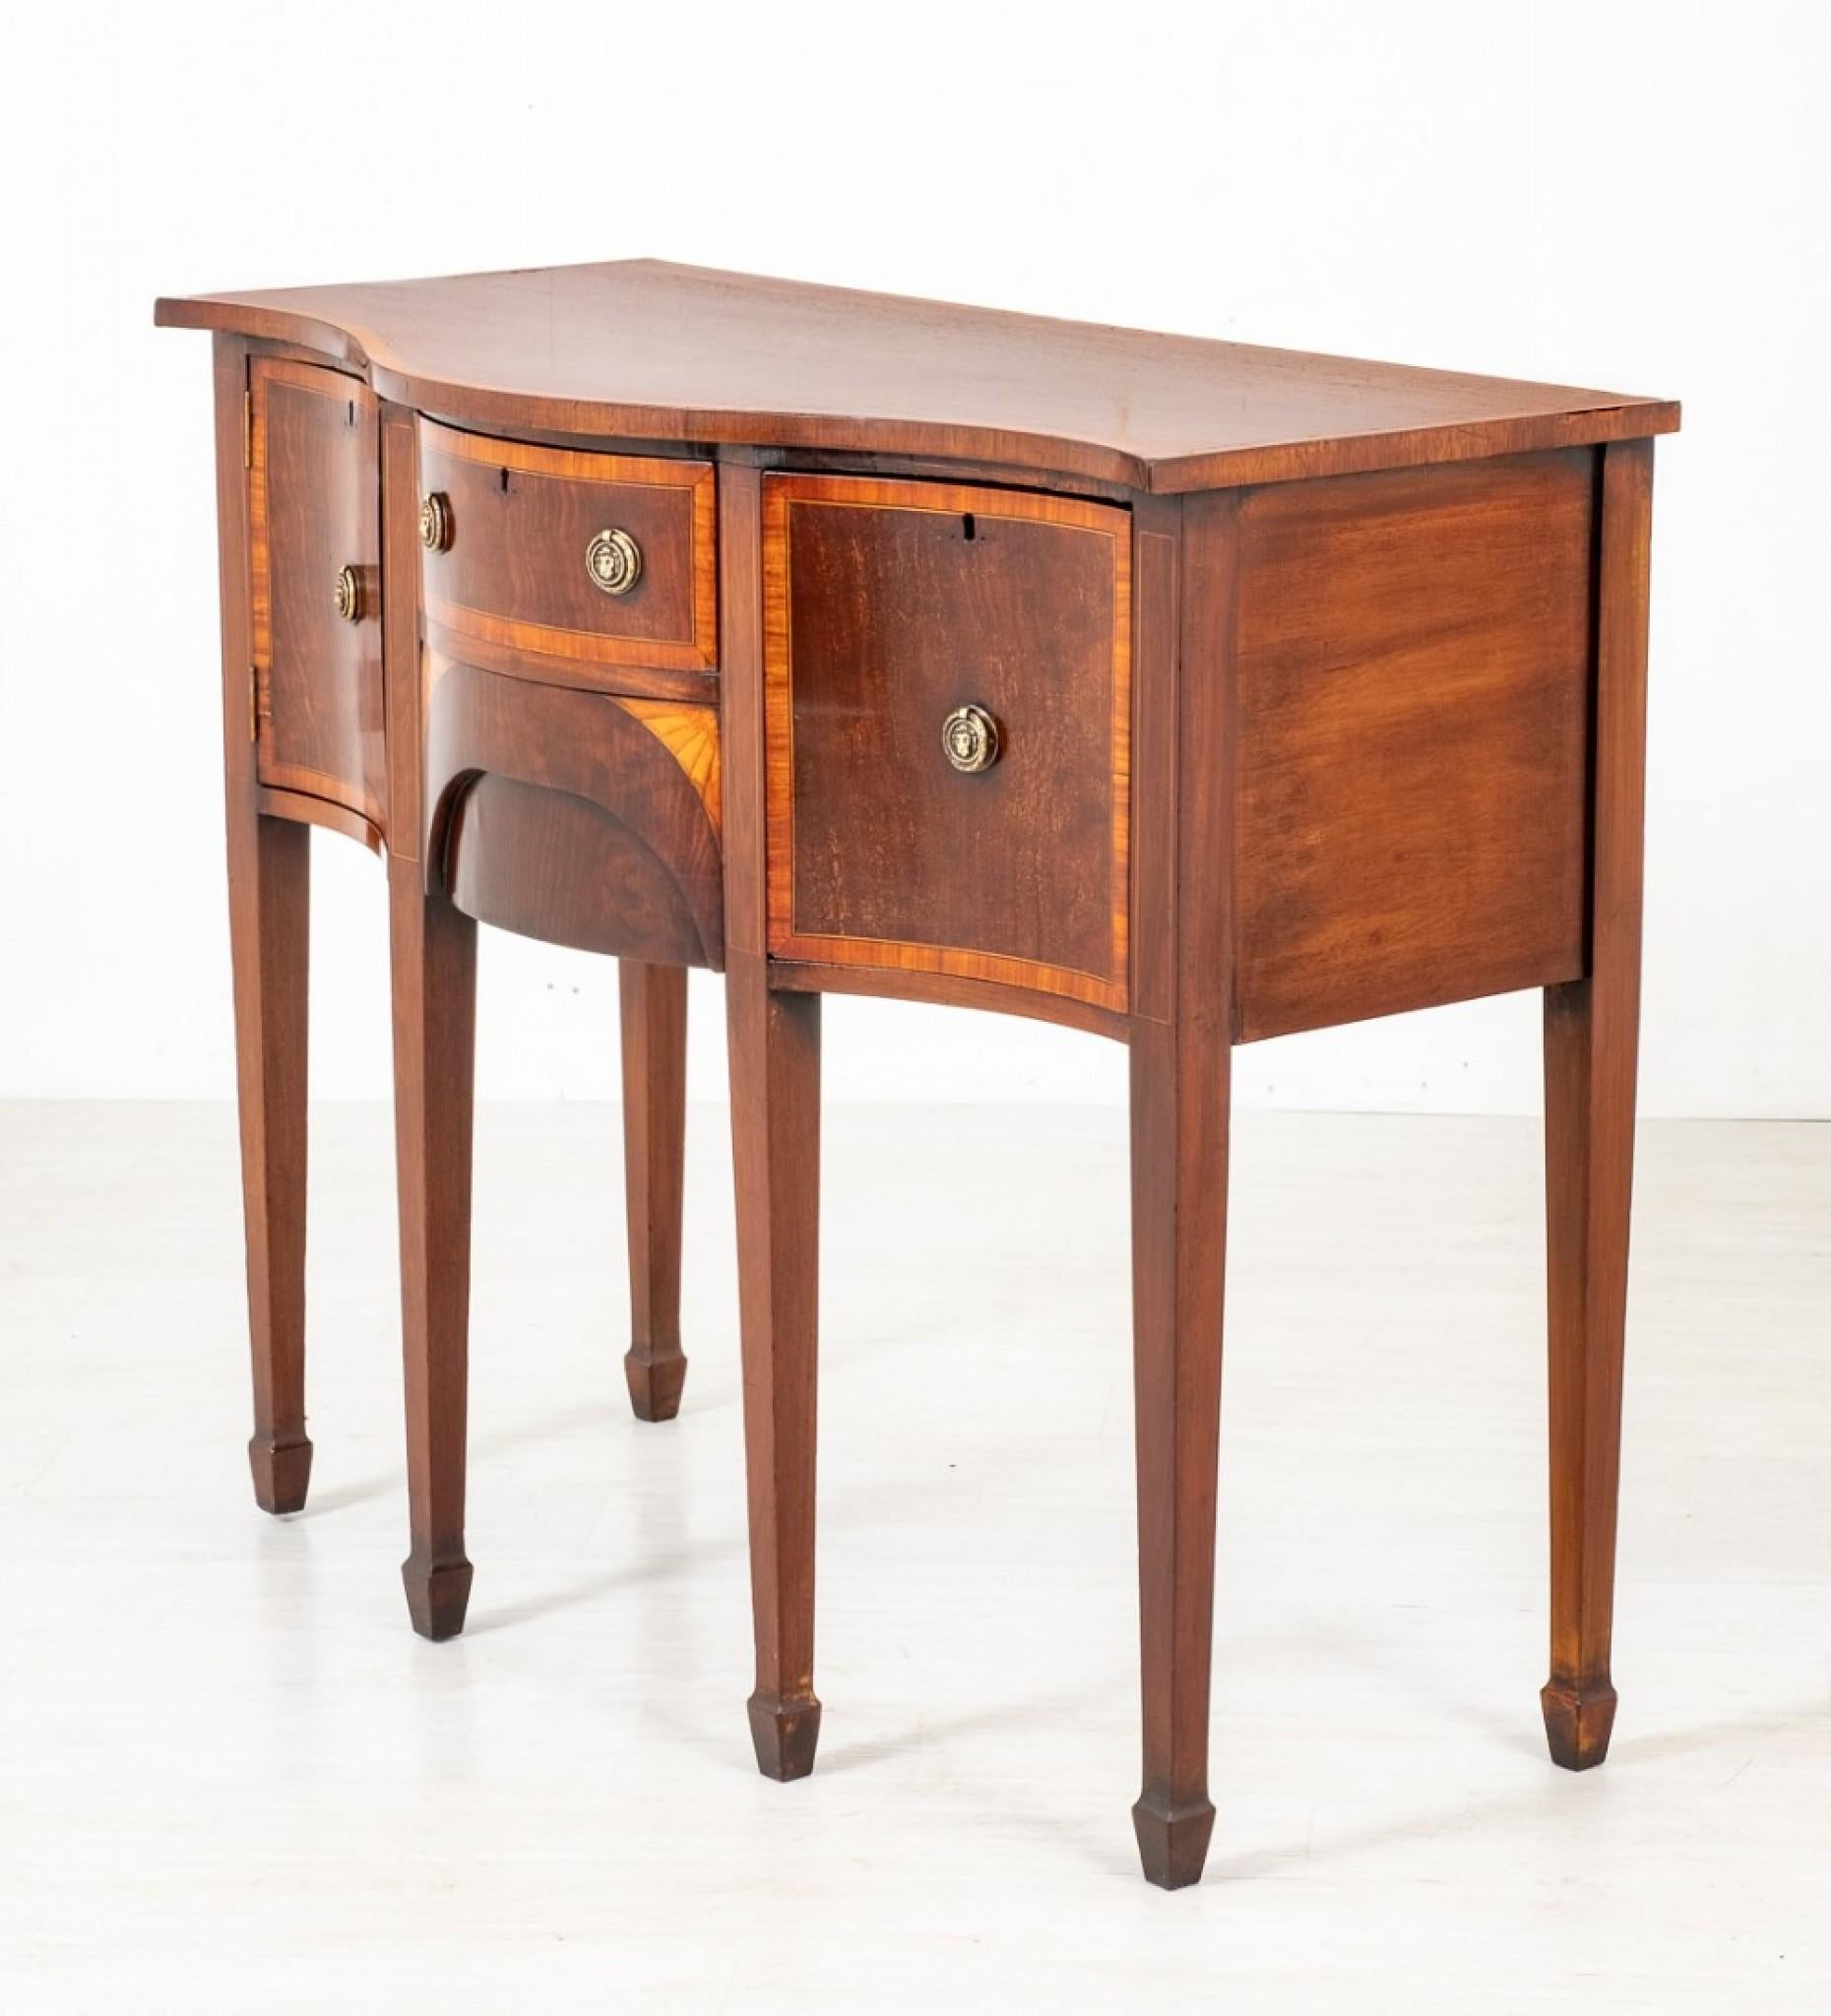 This Pretty mahogany Sheraton Revival Serpentine sideboard standing upon 6 Tapered Legs with Spade feet.
circa 1860
Featuring an arrangement of 3 Oak Lined Drawers (note the quality dovetails) and 1 Cupboard.
The Lower Central Drawer Features